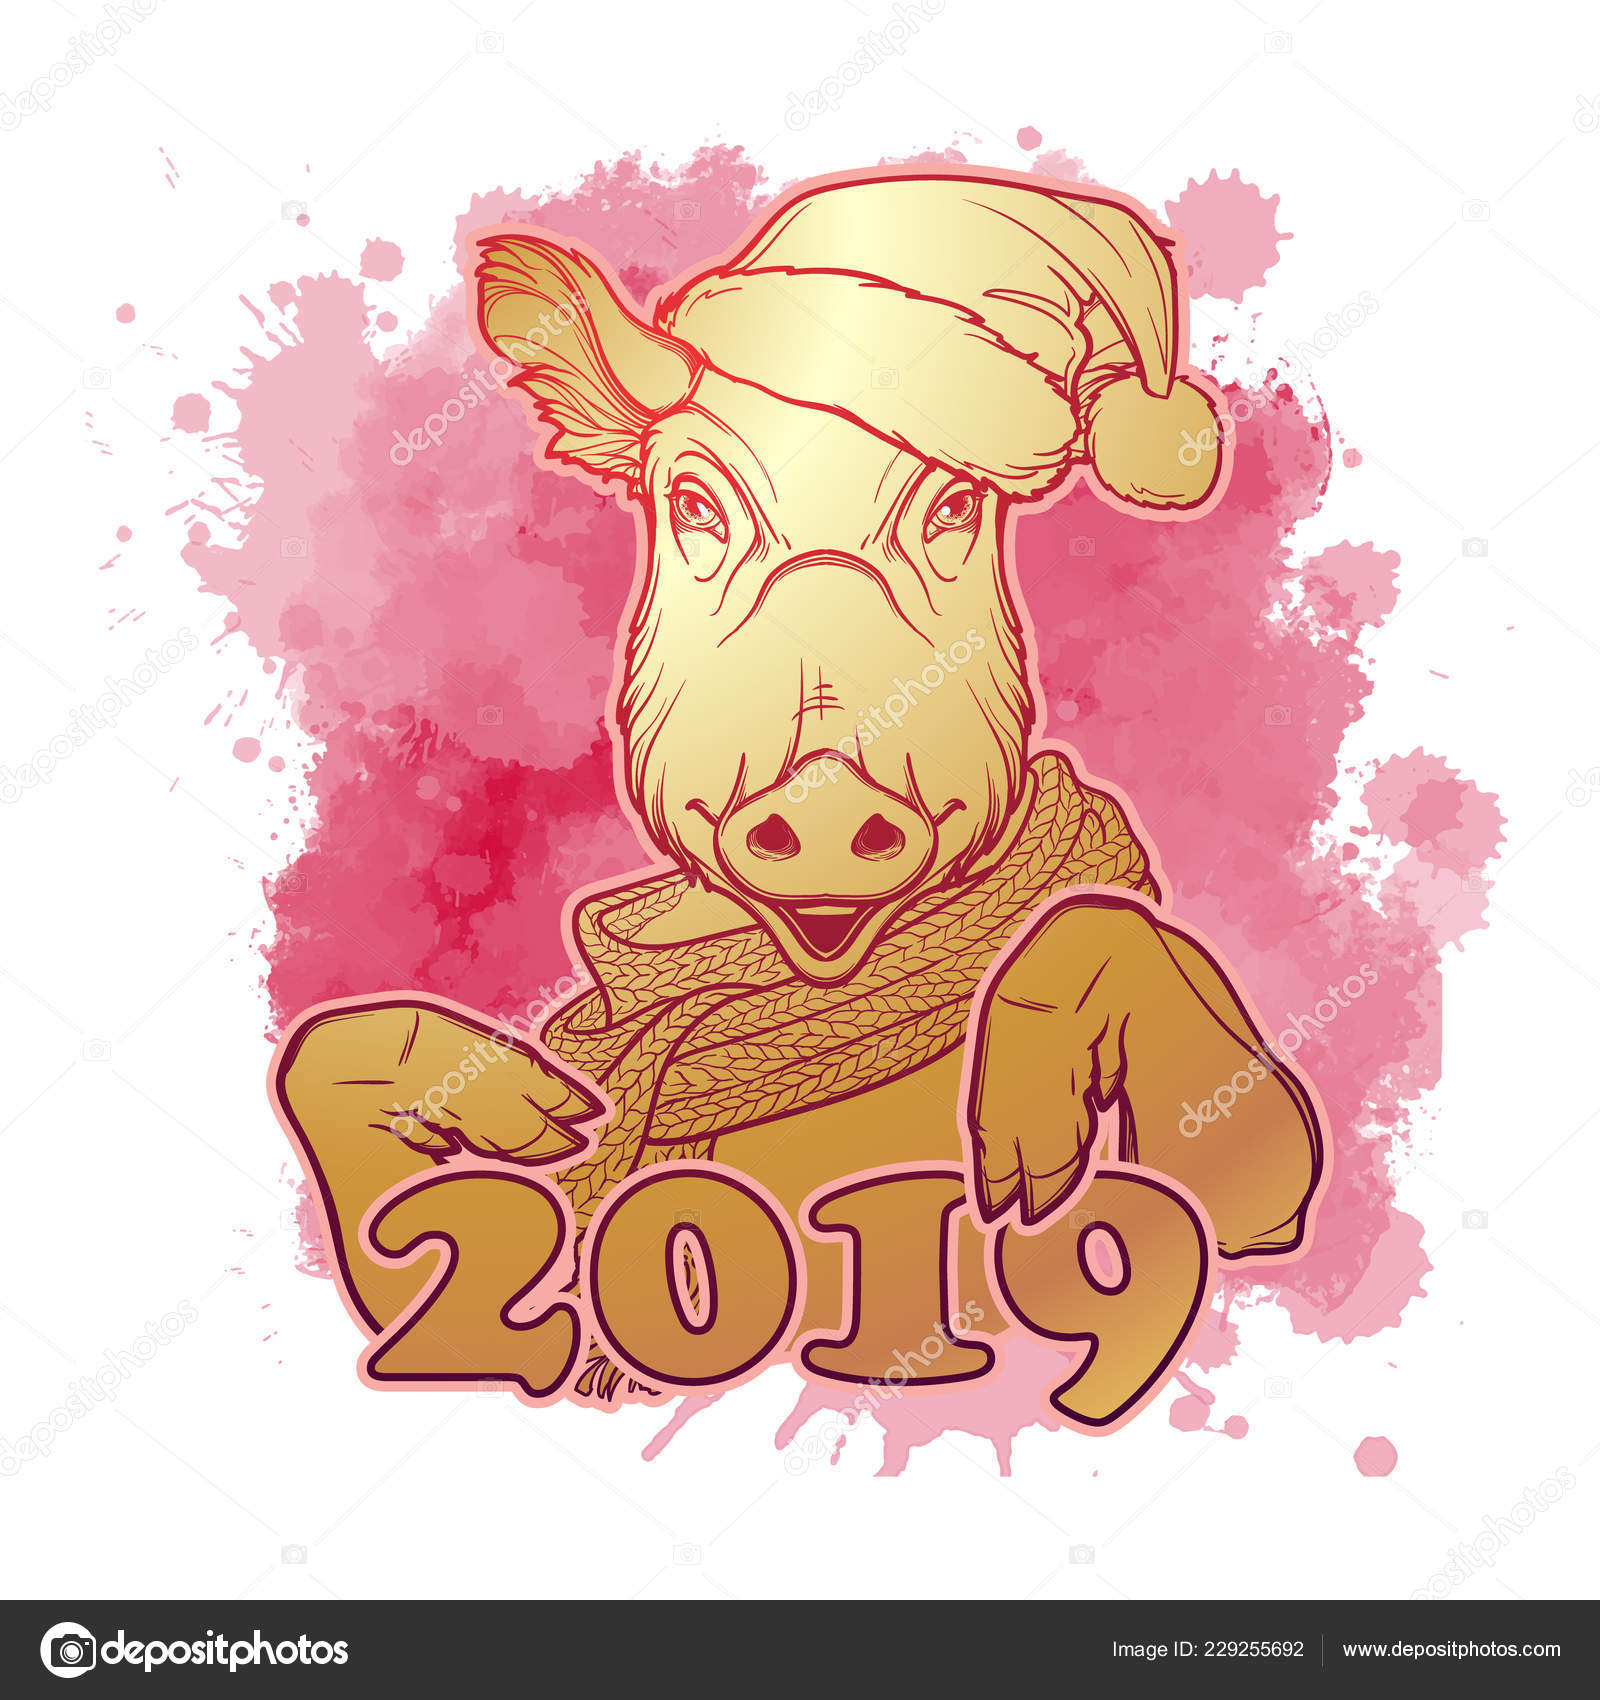 Cute Pig In A Santa Hat And Scarf Mascot Of The New Year 2019 According To Chinese  Zodiac Calendar Stock Illustration - Download Image Now - iStock